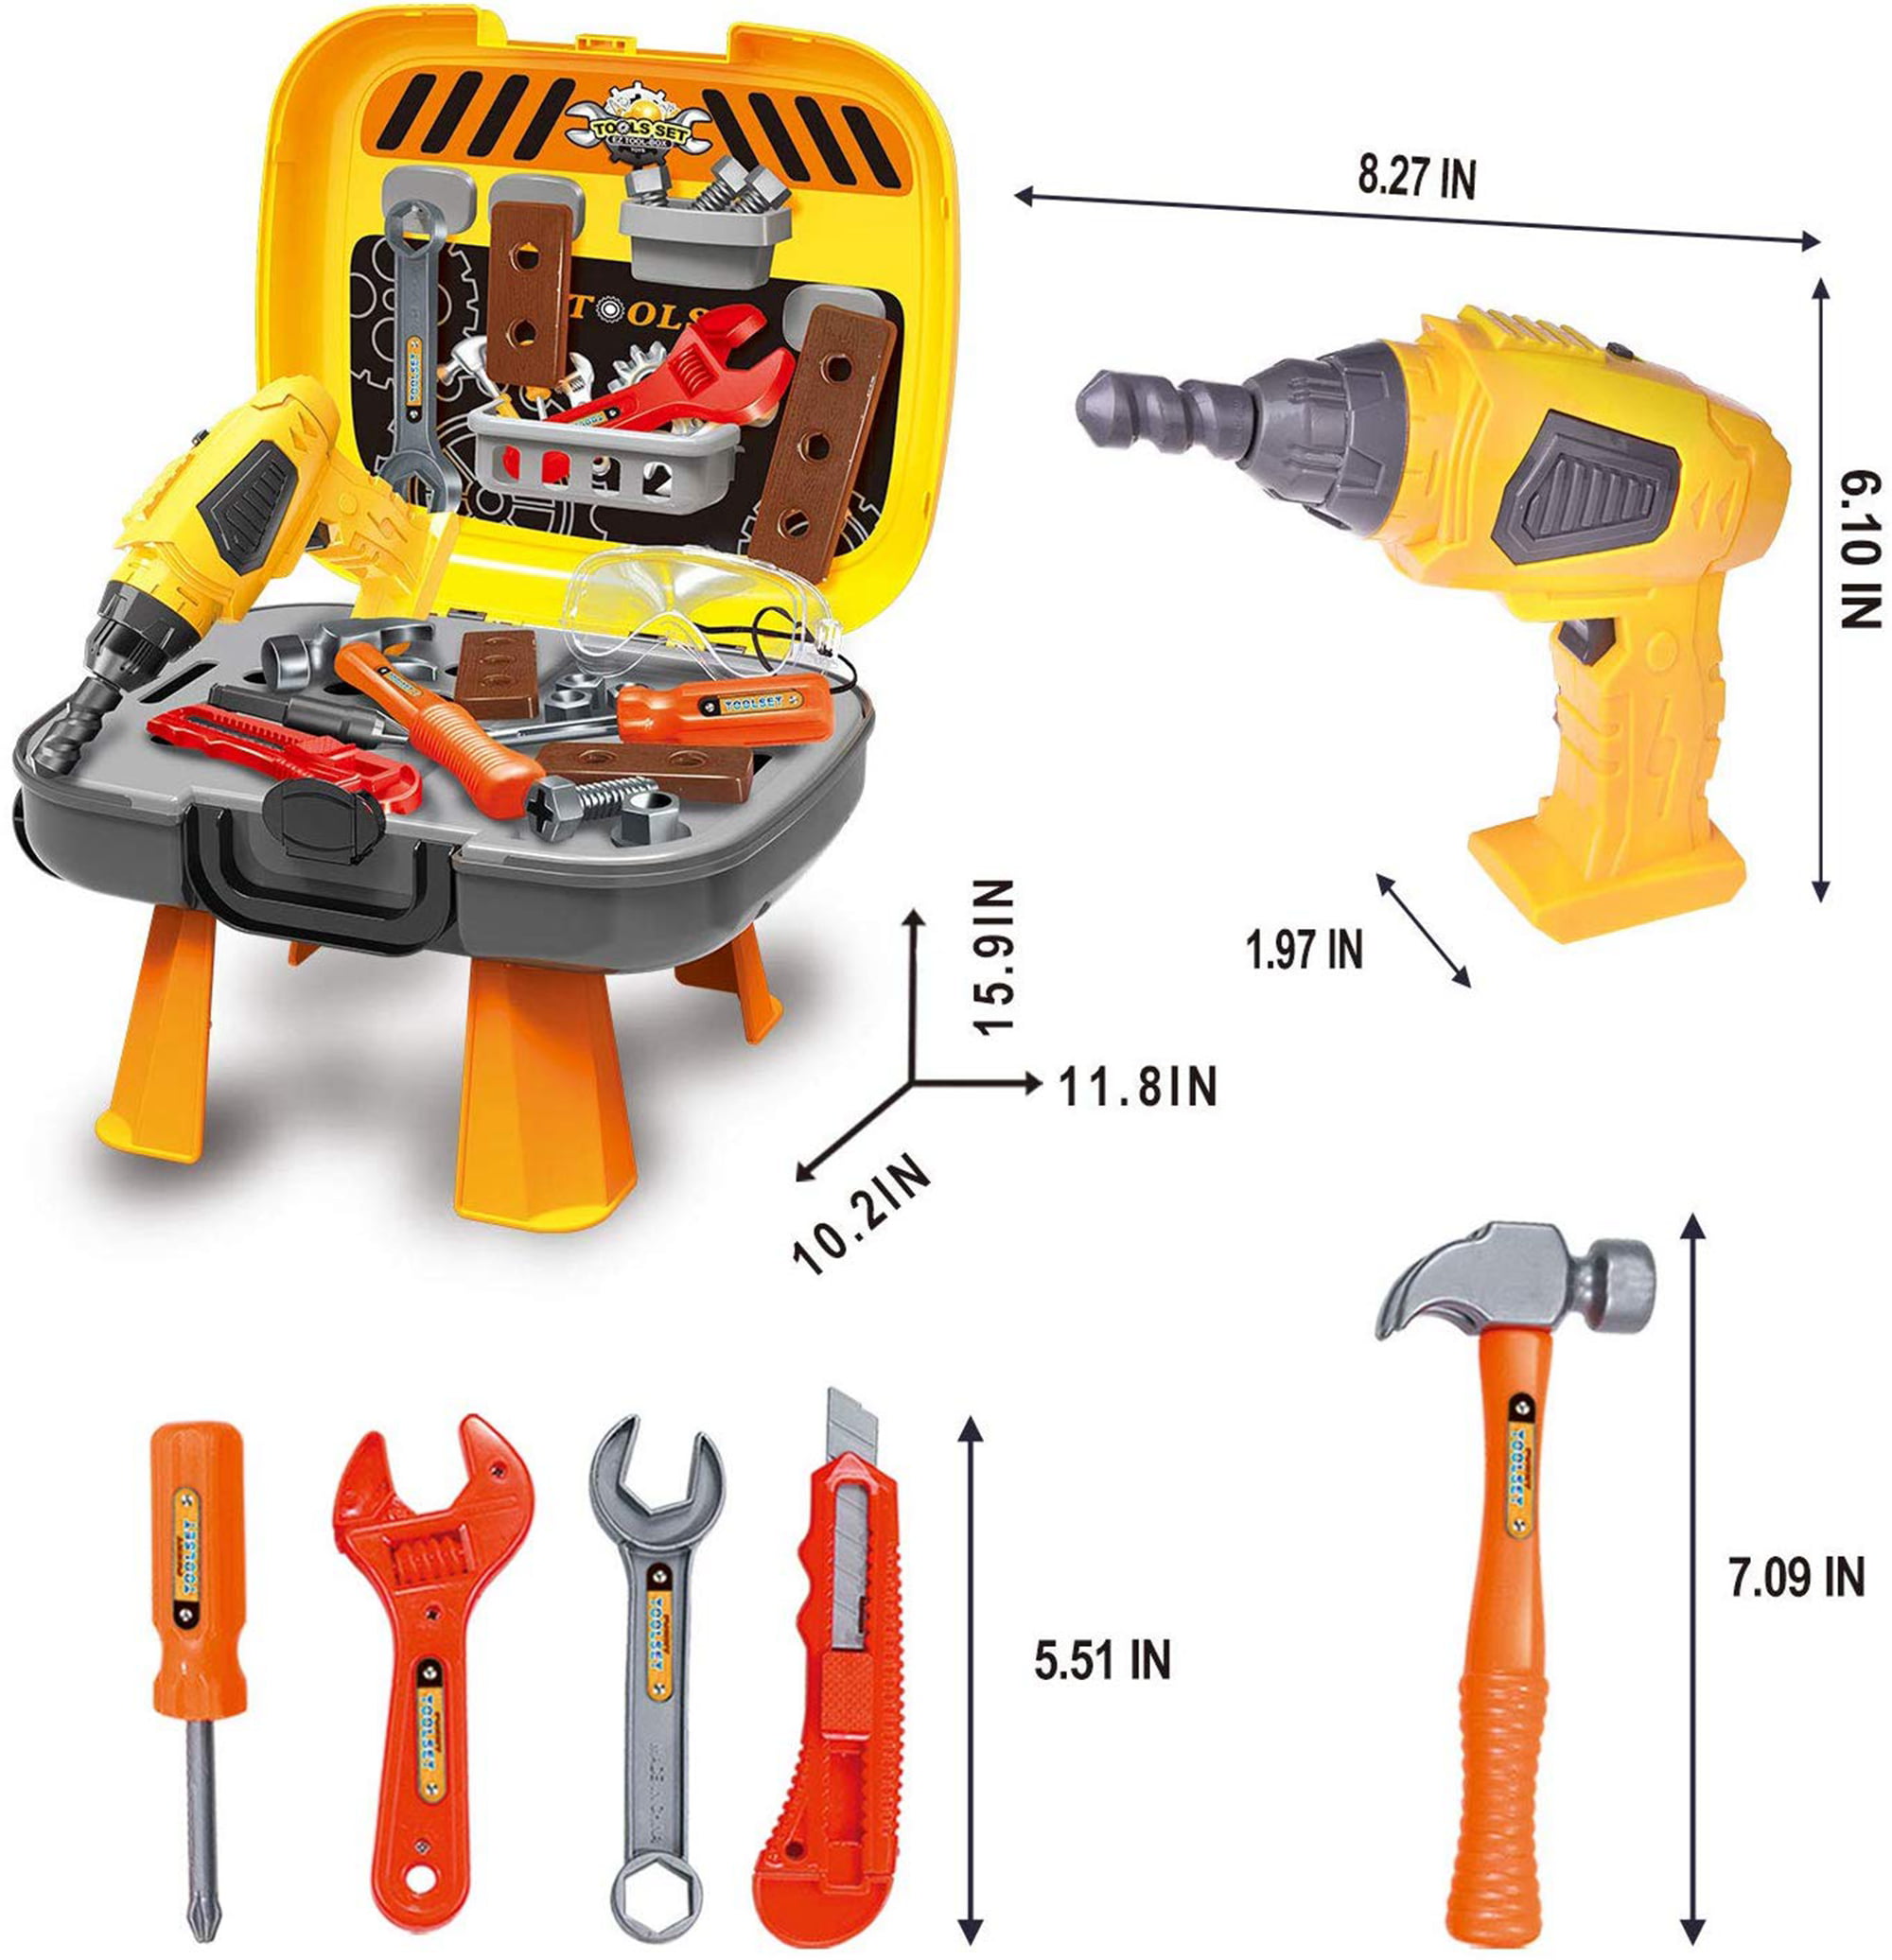 Fun Little Toys 35 Pcs Kids Tool Set, Including Electronic Cordless Drill,  Pretend Play Toy Tool Accessories and a Sturdy Tool Bag, Mix of Desireable  Toys for Boys and Girls 